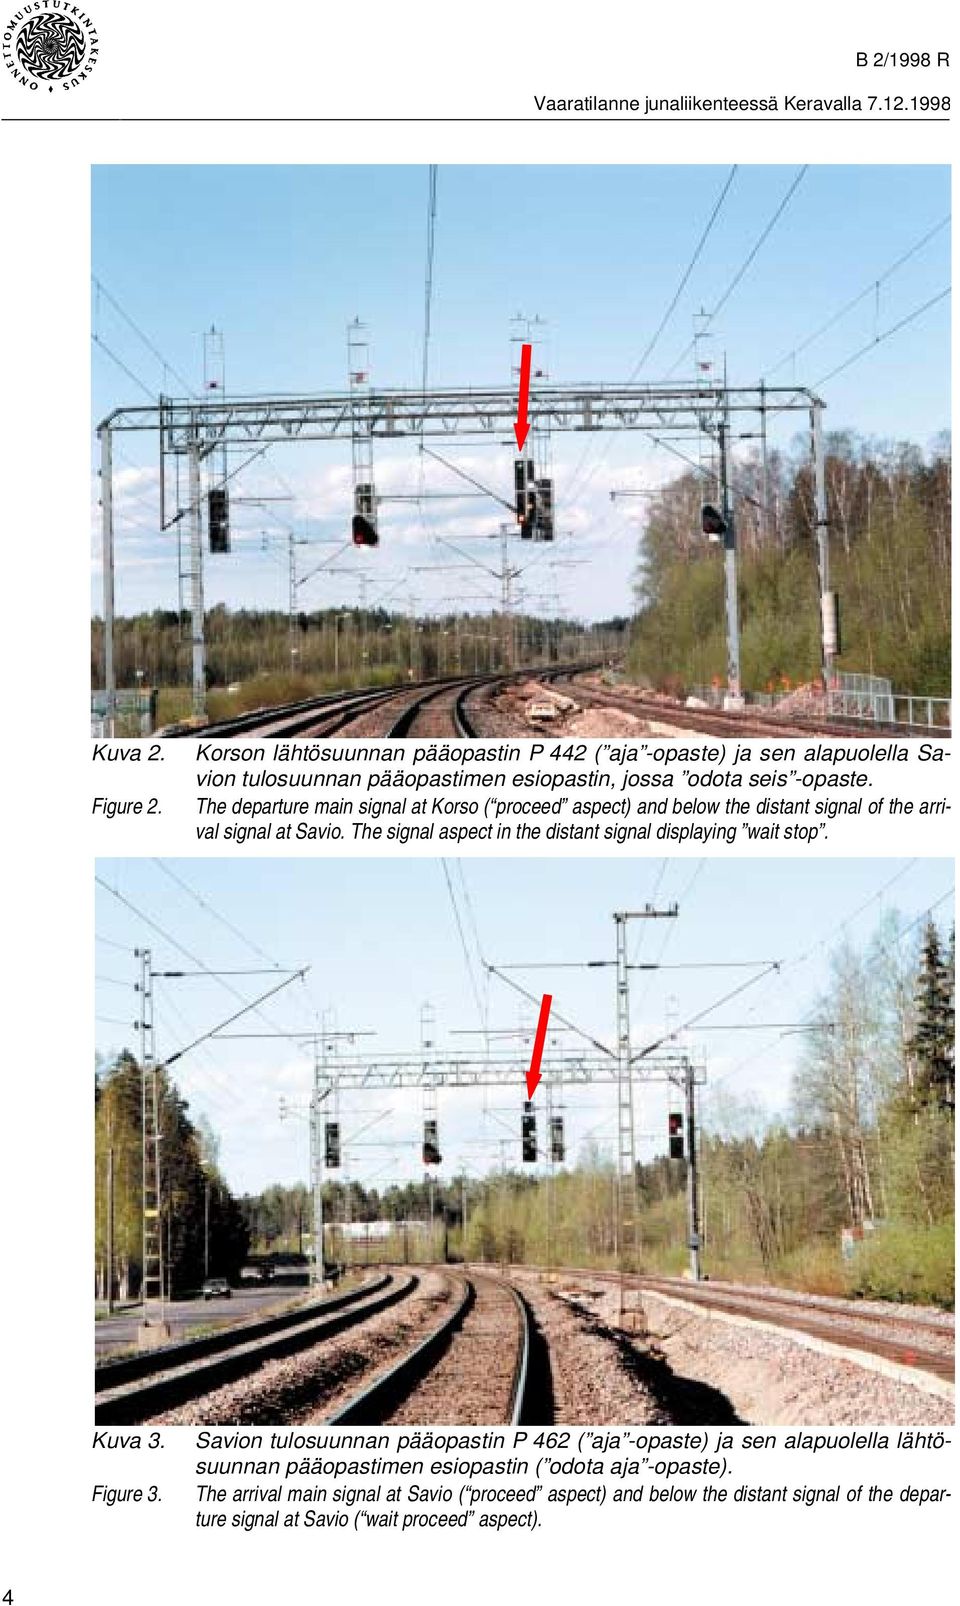 The departure main signal at Korso ( proceed aspect) and below the distant signal of the arrival signal at Savio.